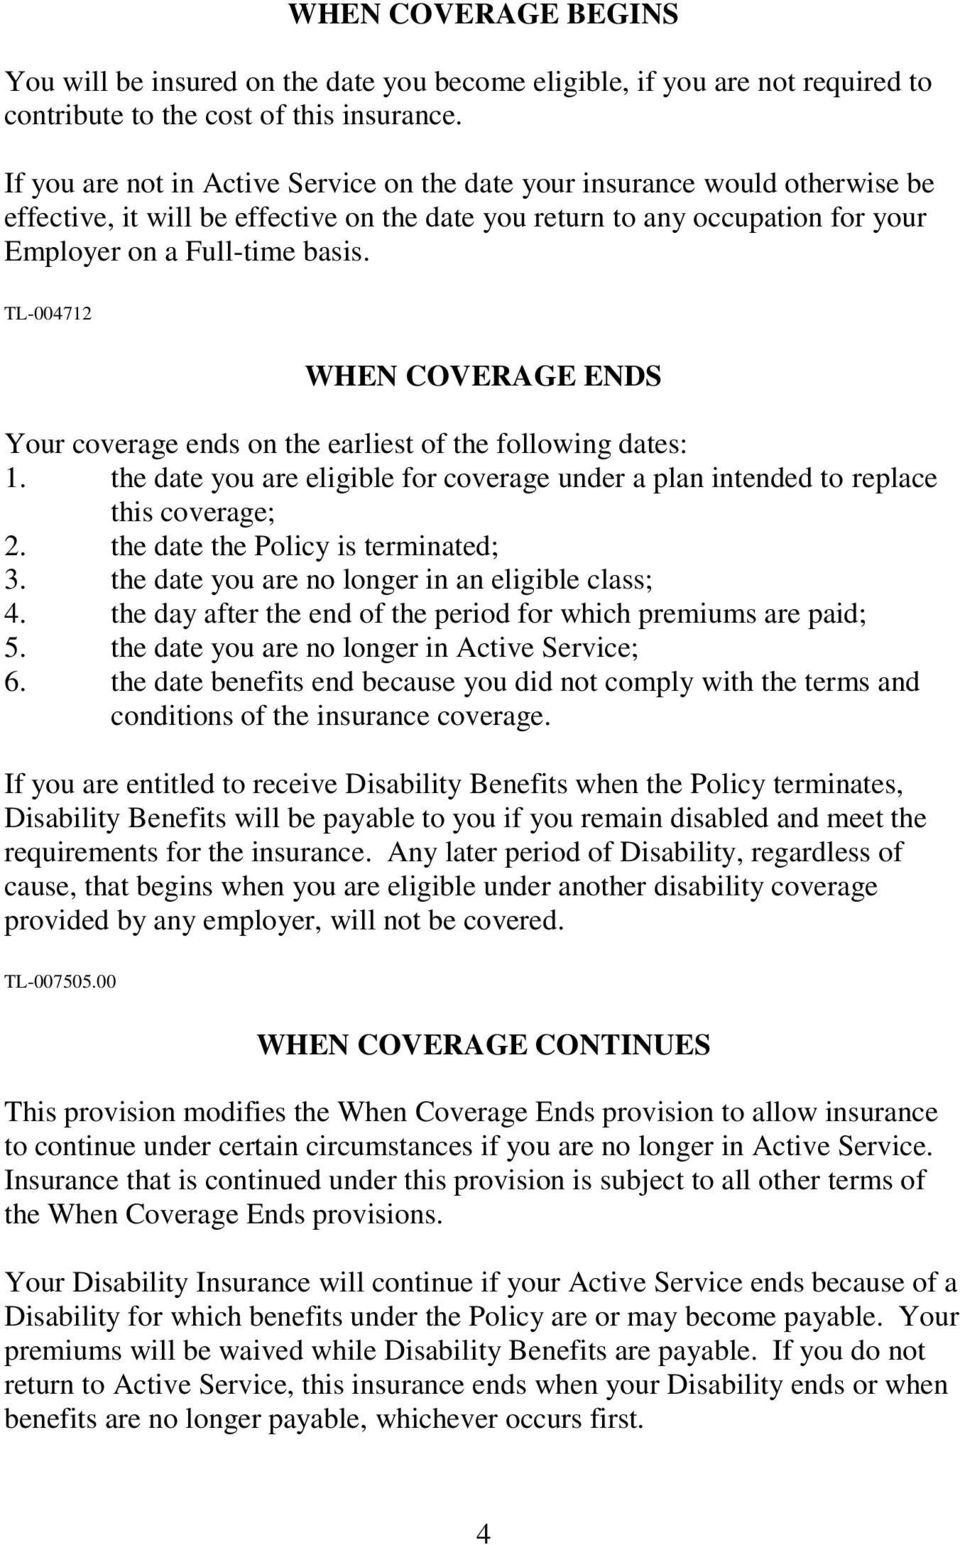 TL-004712 WHEN COVERAGE ENDS Your coverage ends on the earliest of the following dates: 1. the date you are eligible for coverage under a plan intended to replace this coverage; 2.